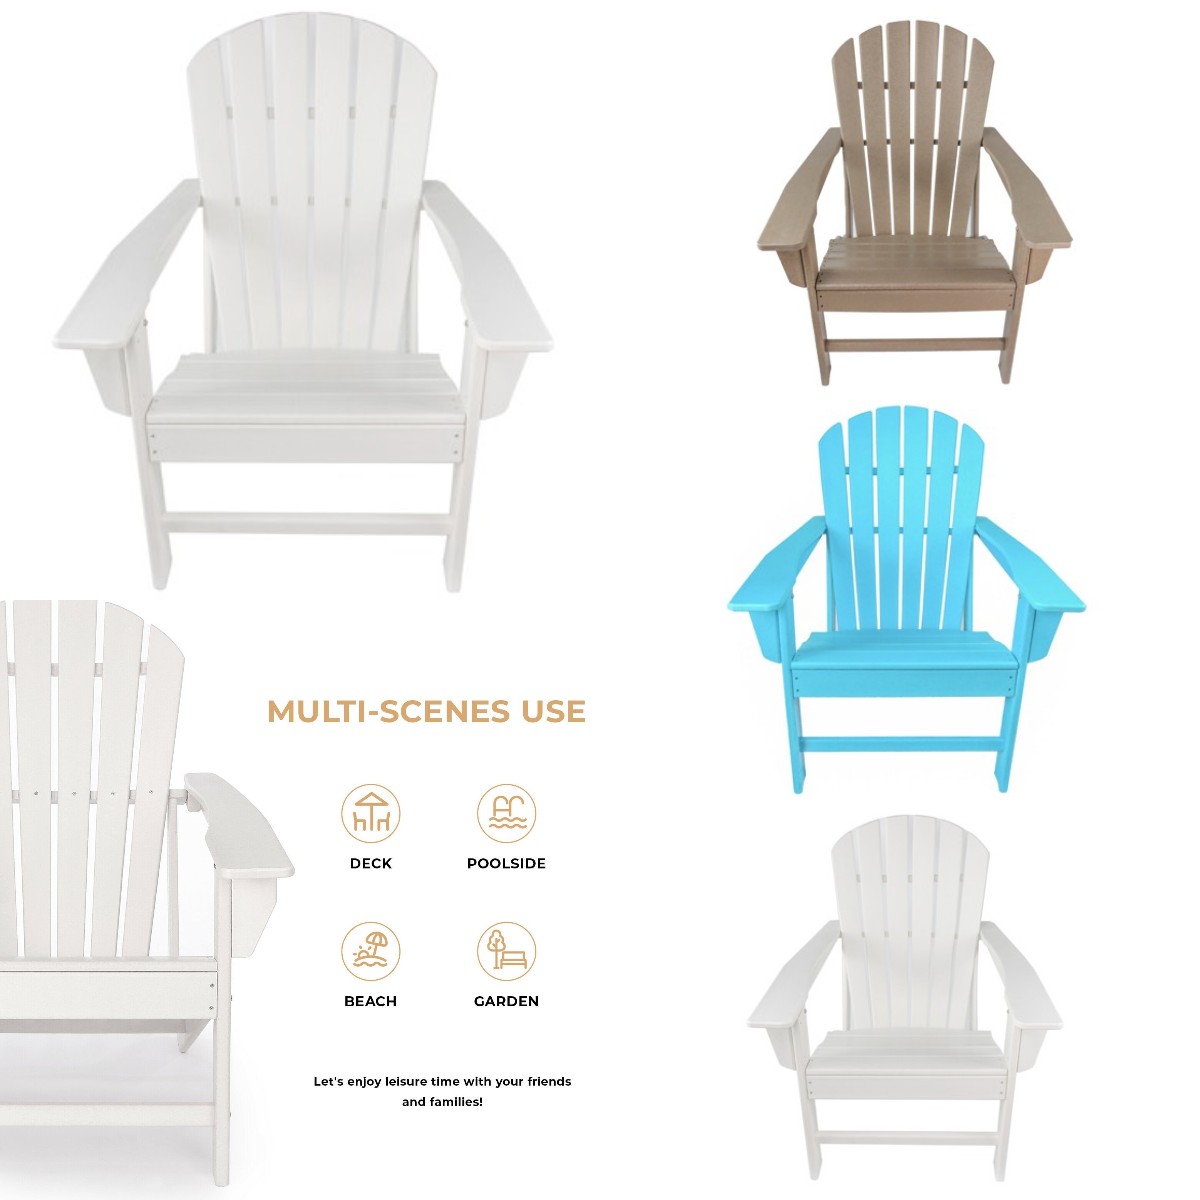 Adirondack Chair Resin, 350 lbs Capacity Load,Patio Chair Lawn Chair Outdoor Adirondack Chairs Weather Resistant for Patio Deck Garden 33.07*31.1*36.4" HDPE Resin Wood,White - image 1 of 9